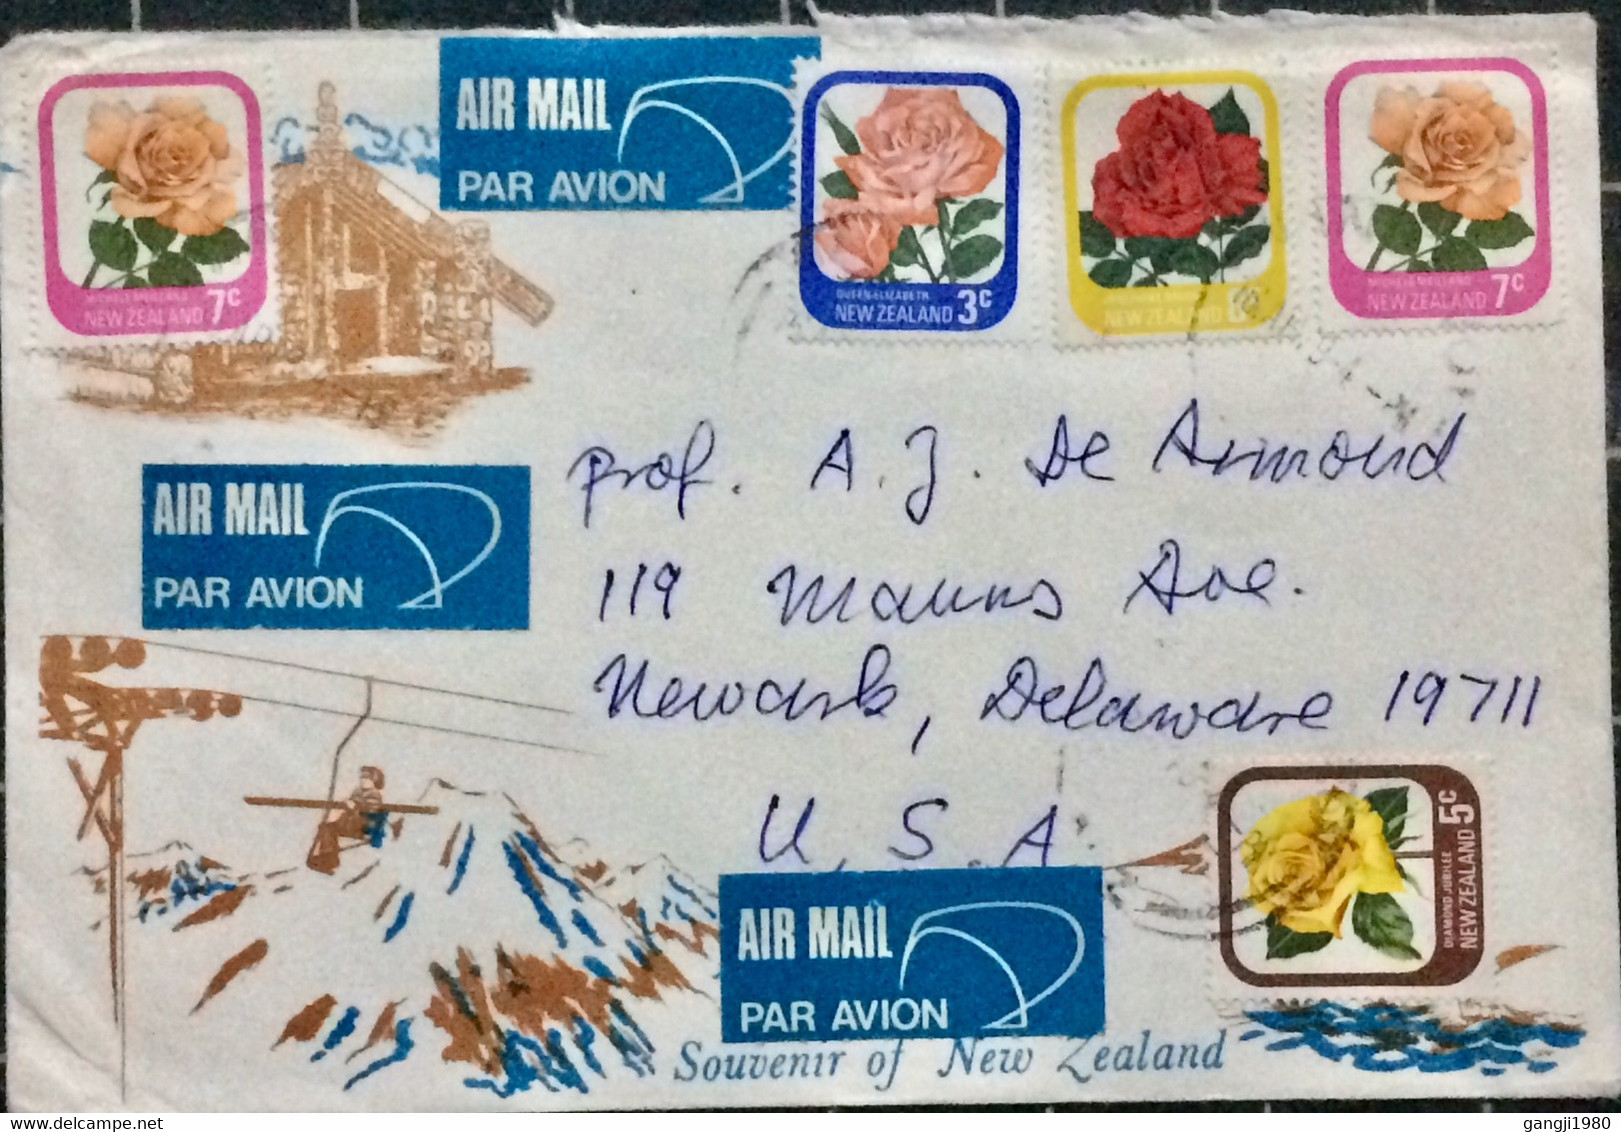 NEW ZEALAND 1976, ILLUSTRATE SOUVENIR, COVER USED TO USA, CHAIR CABLE, BUILDING, ROSE FLOWER  5 STAMP - Brieven En Documenten